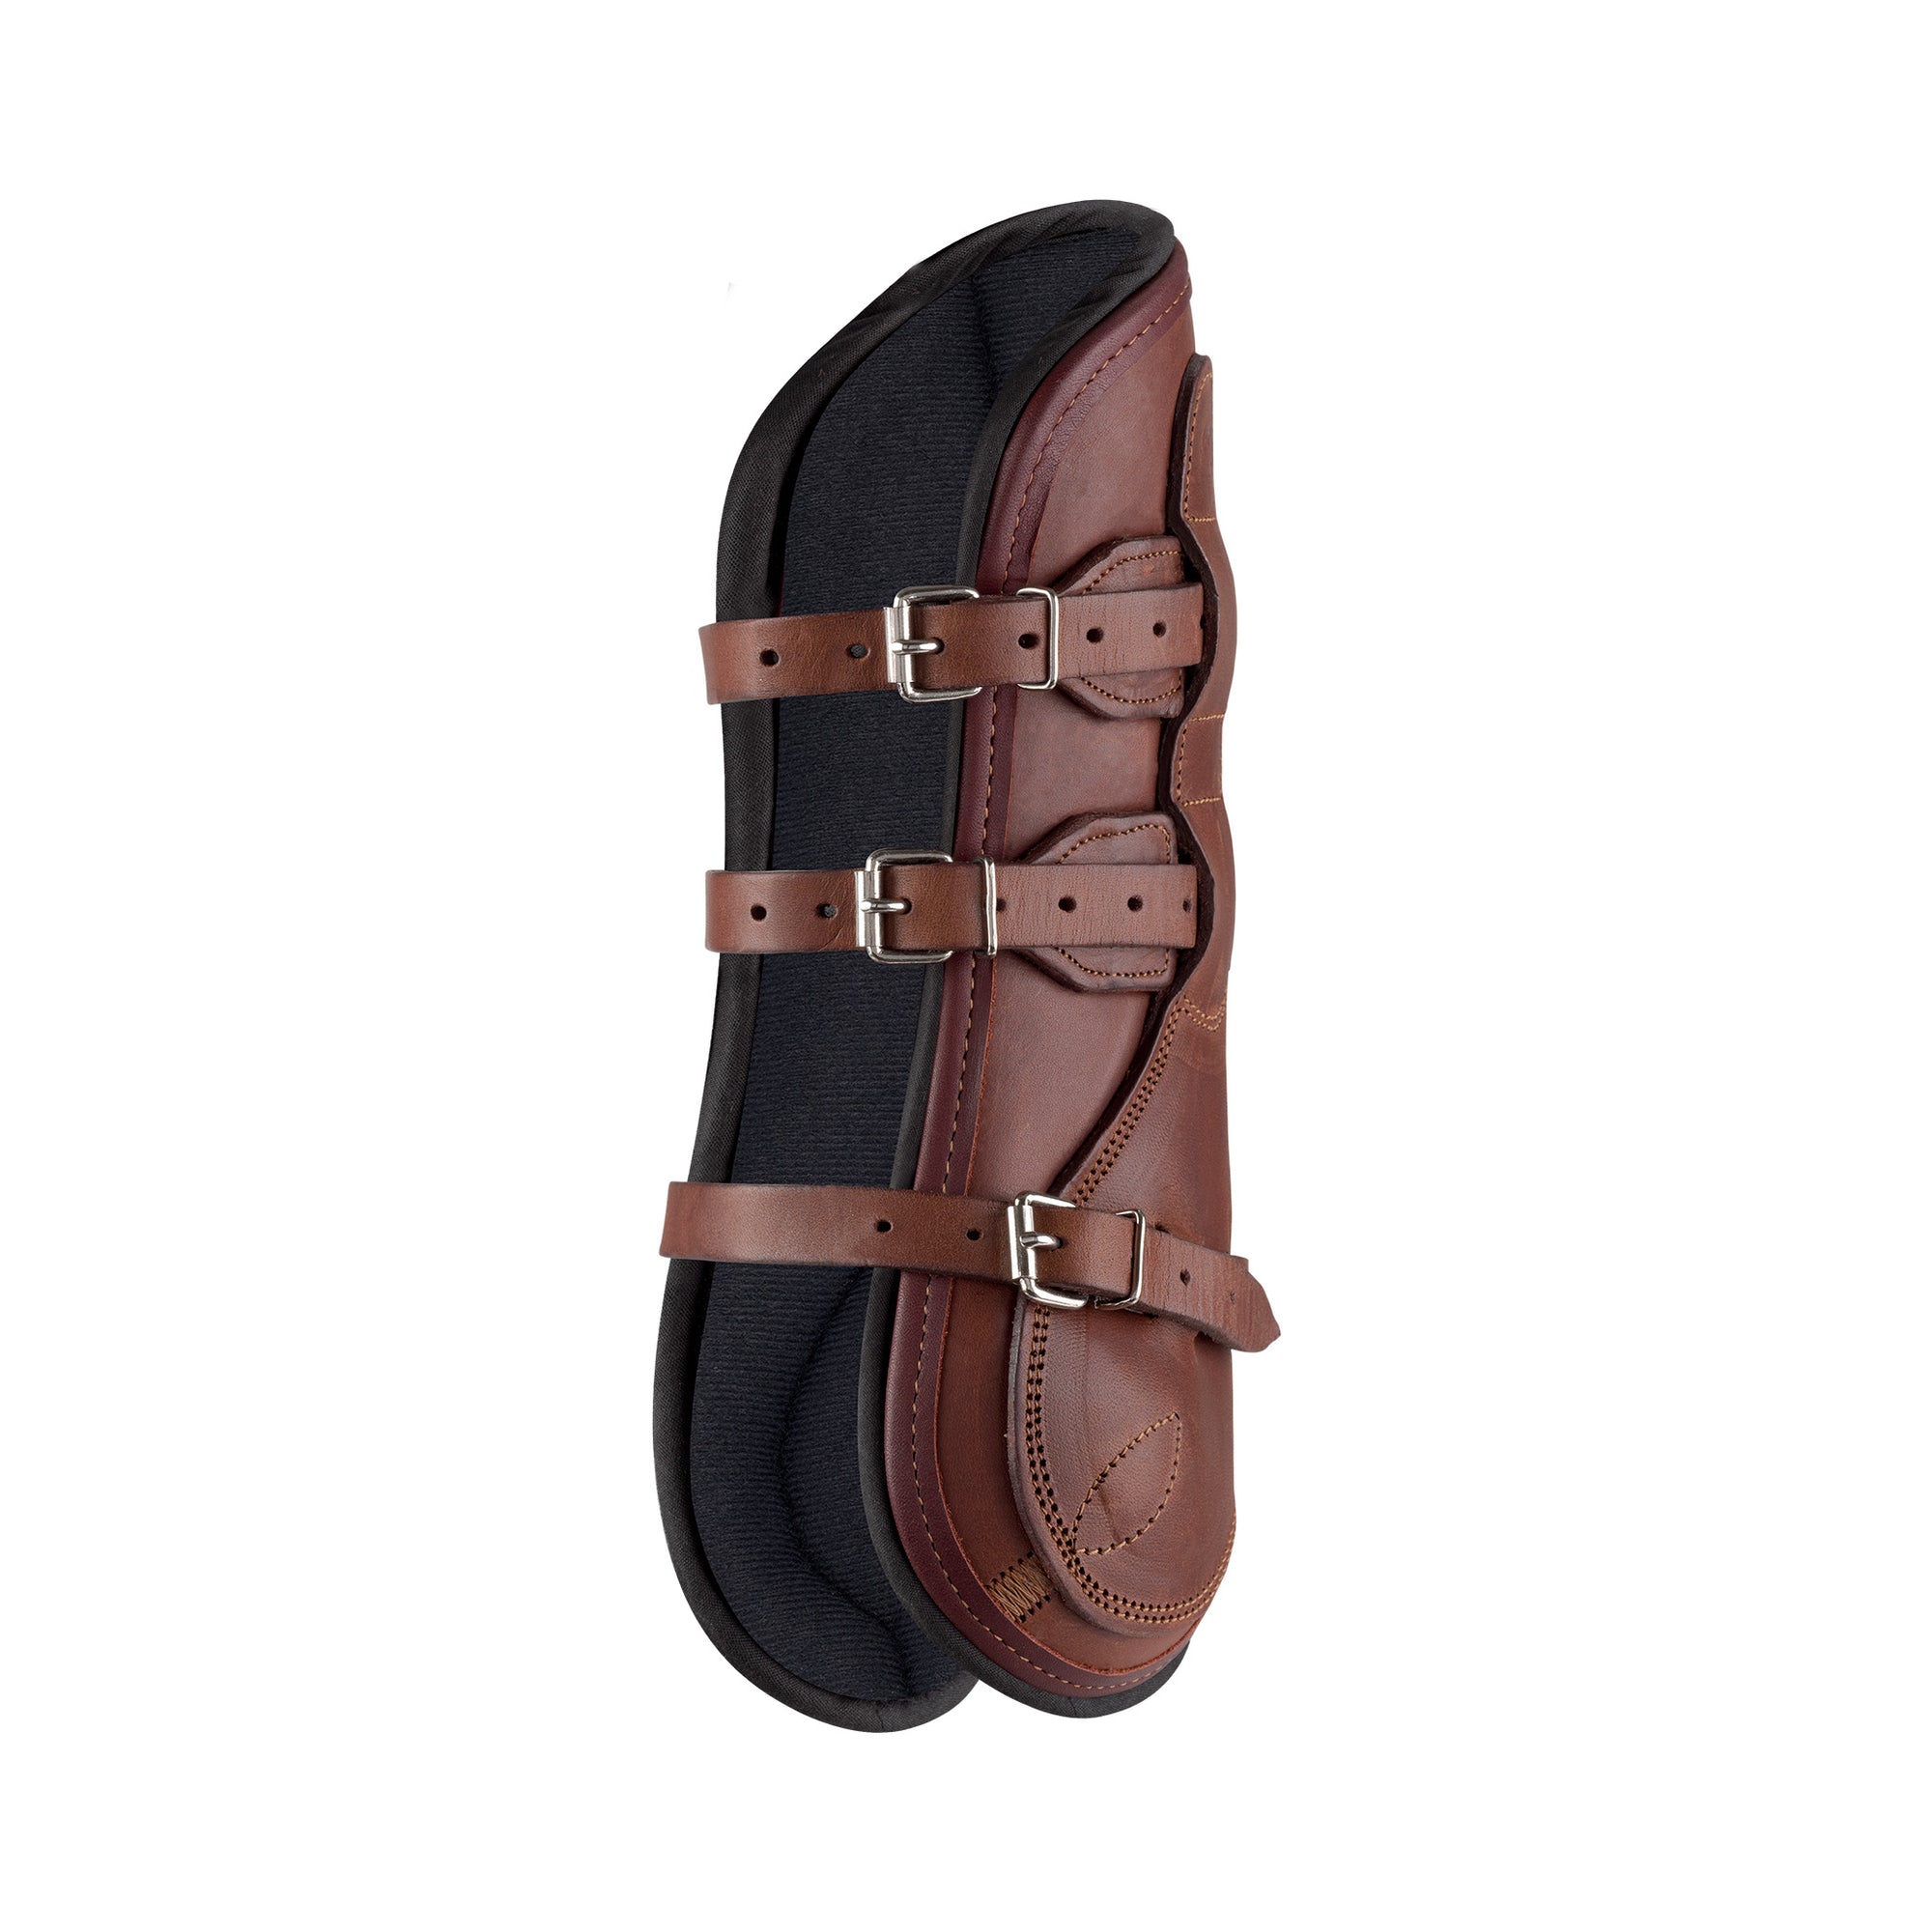 Luxe Front Boot features Exquisite Full Grain French Leather with roller buckle closures